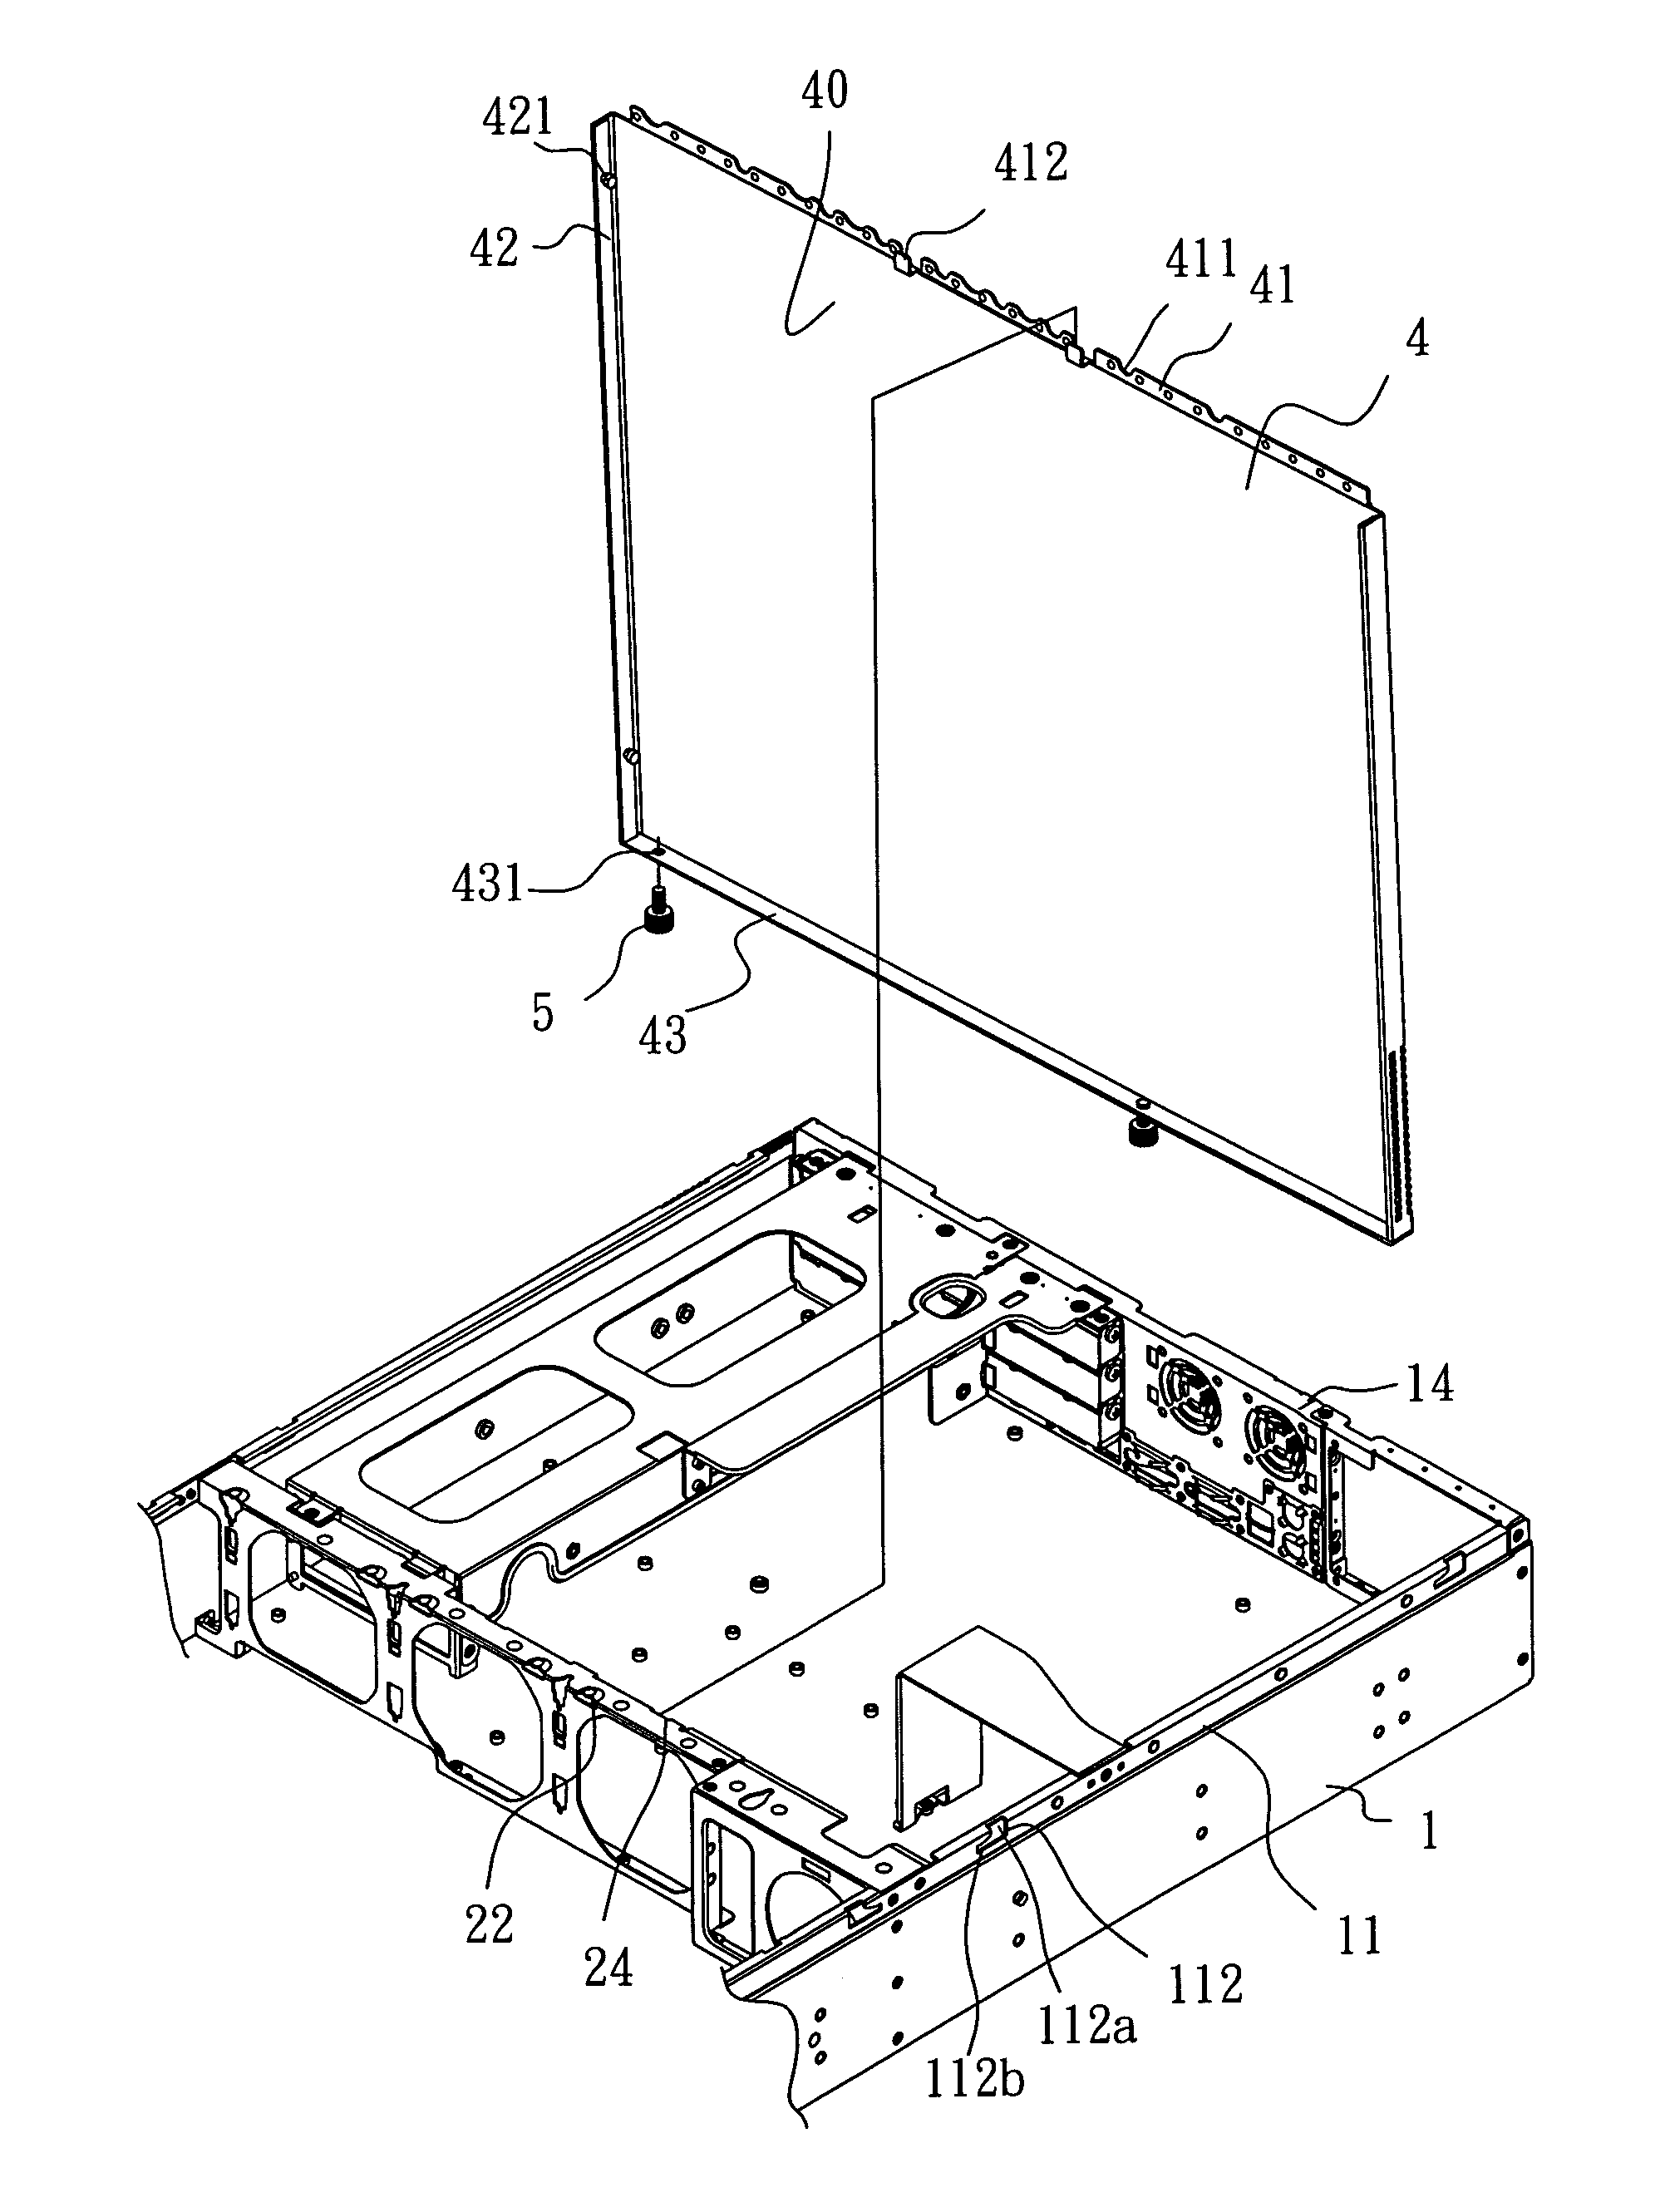 Detachable case assembly for computer server